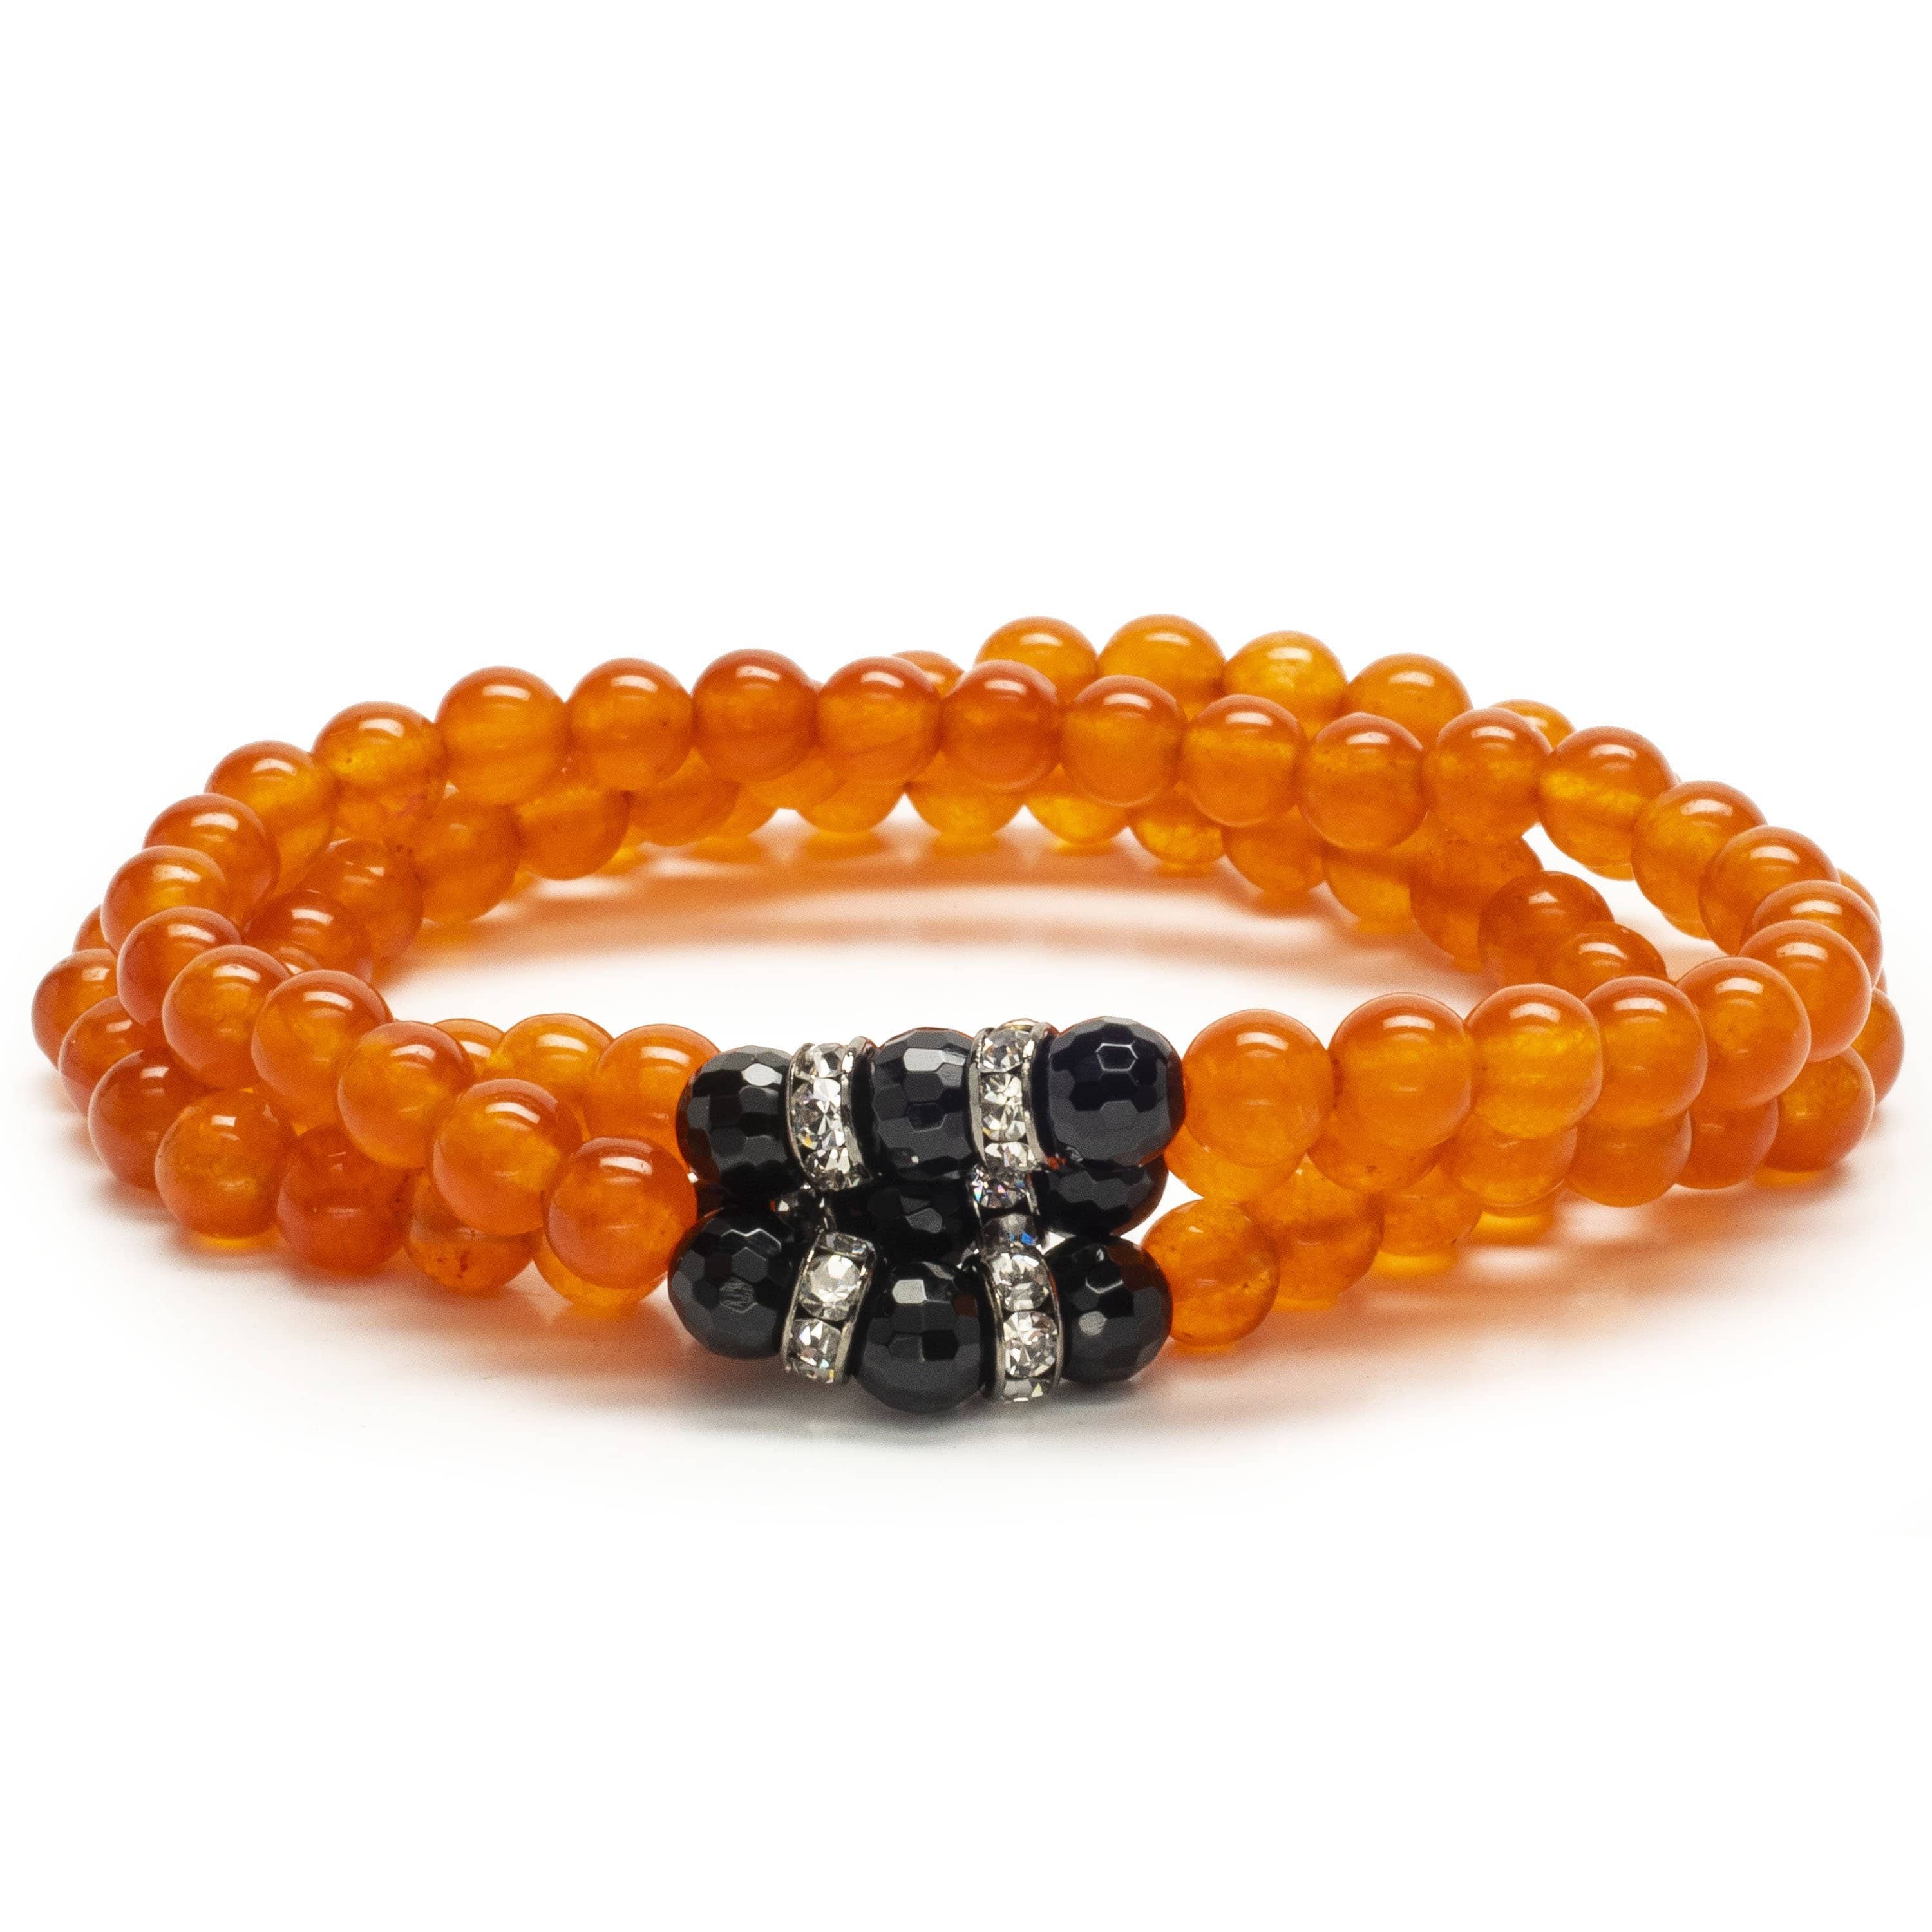 Kalifano Gemstone Bracelets Orange Agate 6mm Beads with Black Agate and Silver Crystal Accent Beads Triple Wrap Elastic Gemstone Bracelet WHITE-BGI3-060